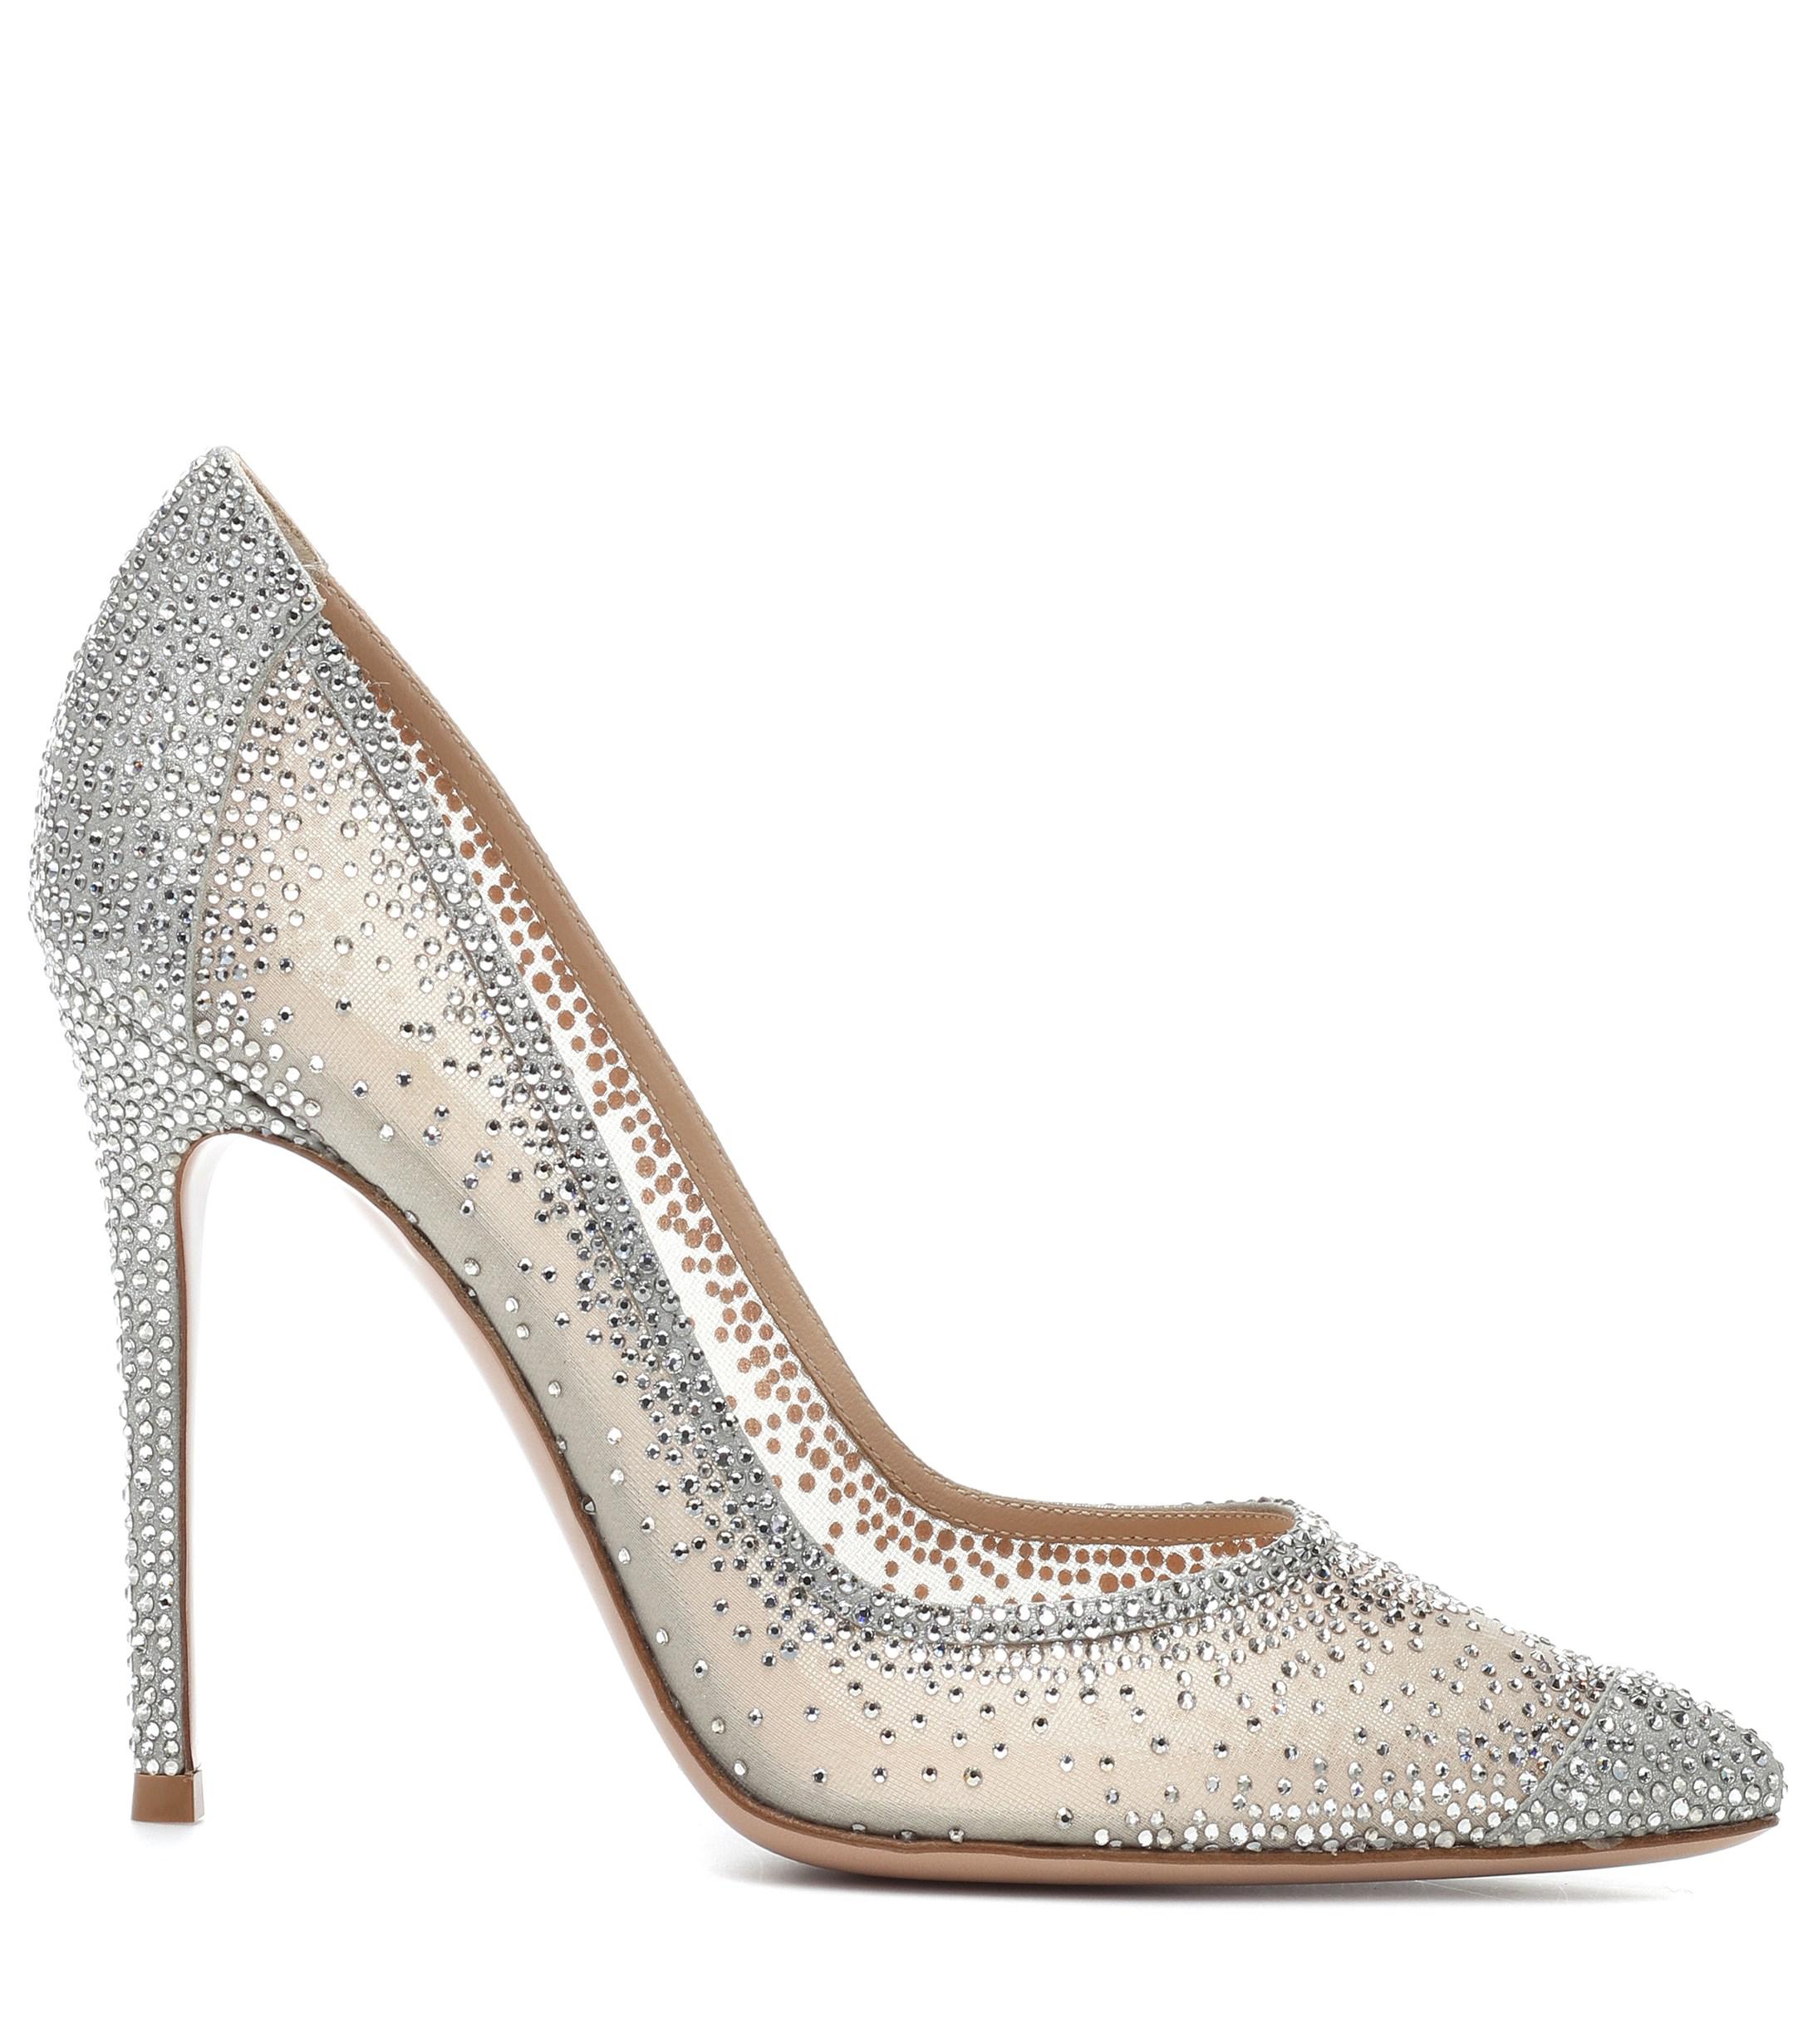 Gianvito Rossi Leather Rania 105 Crystal-embellished Pumps in Silver